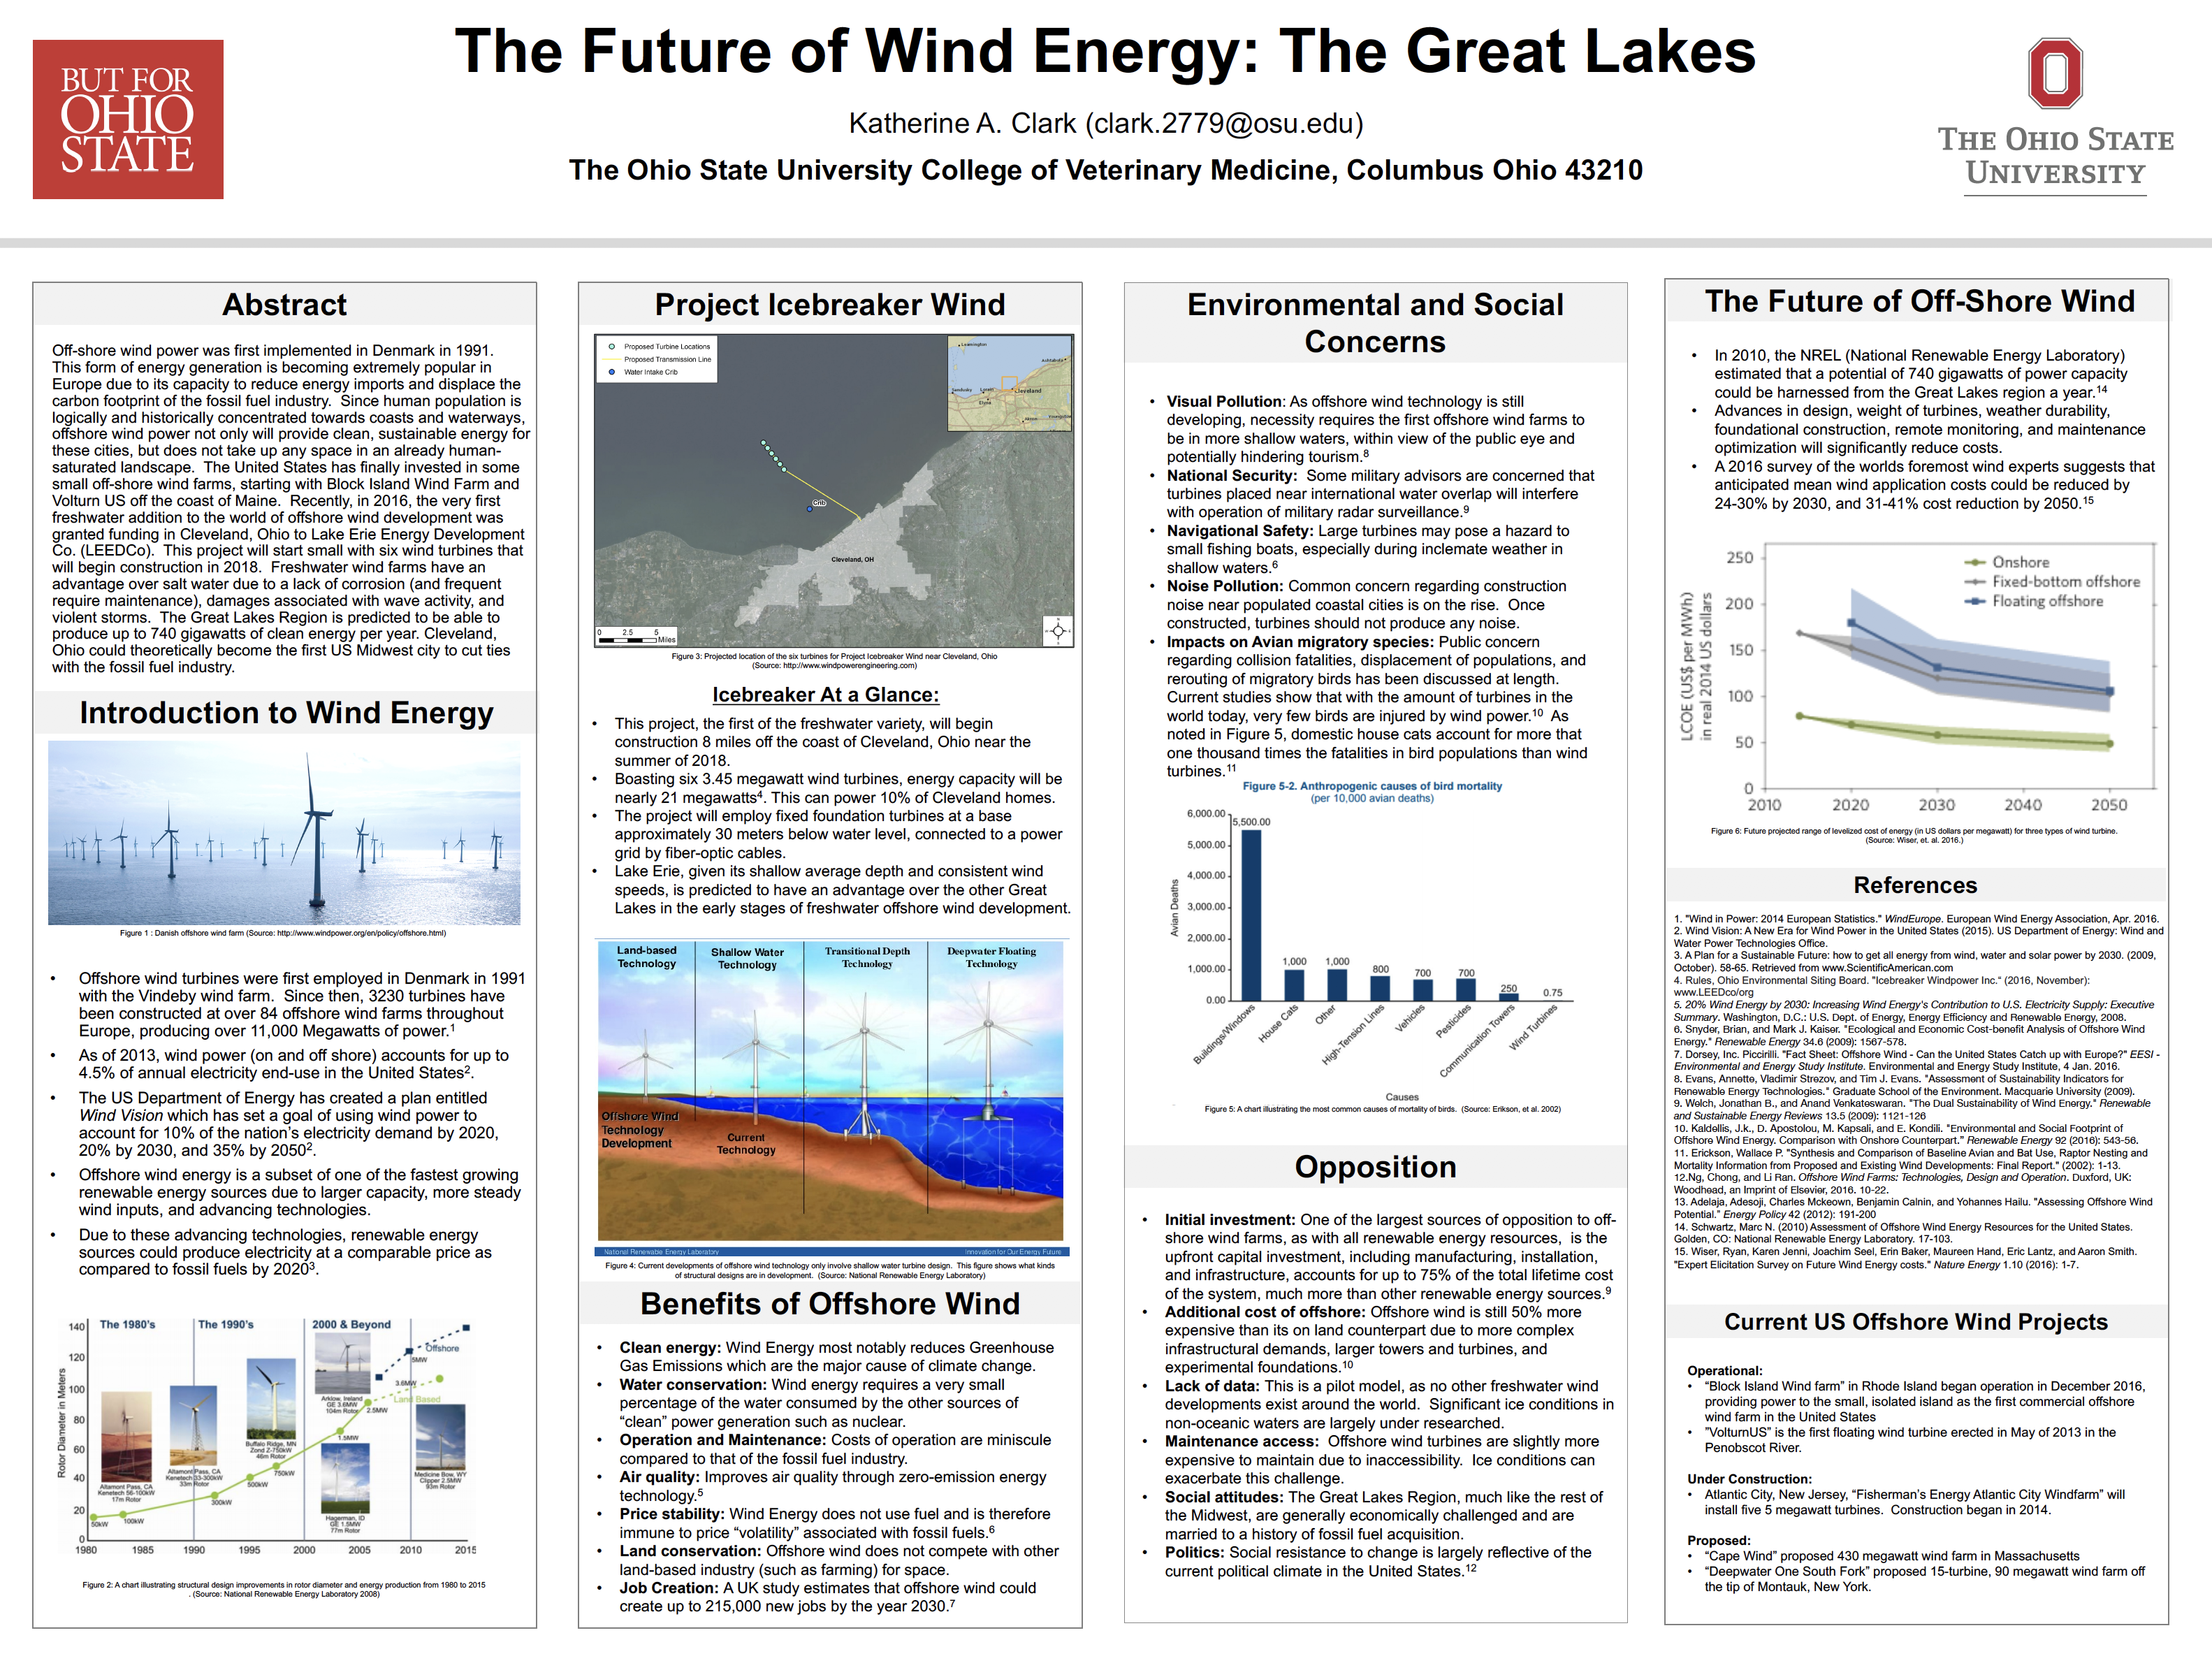 student created poster entitled the future of wind energy: The Great Lakes